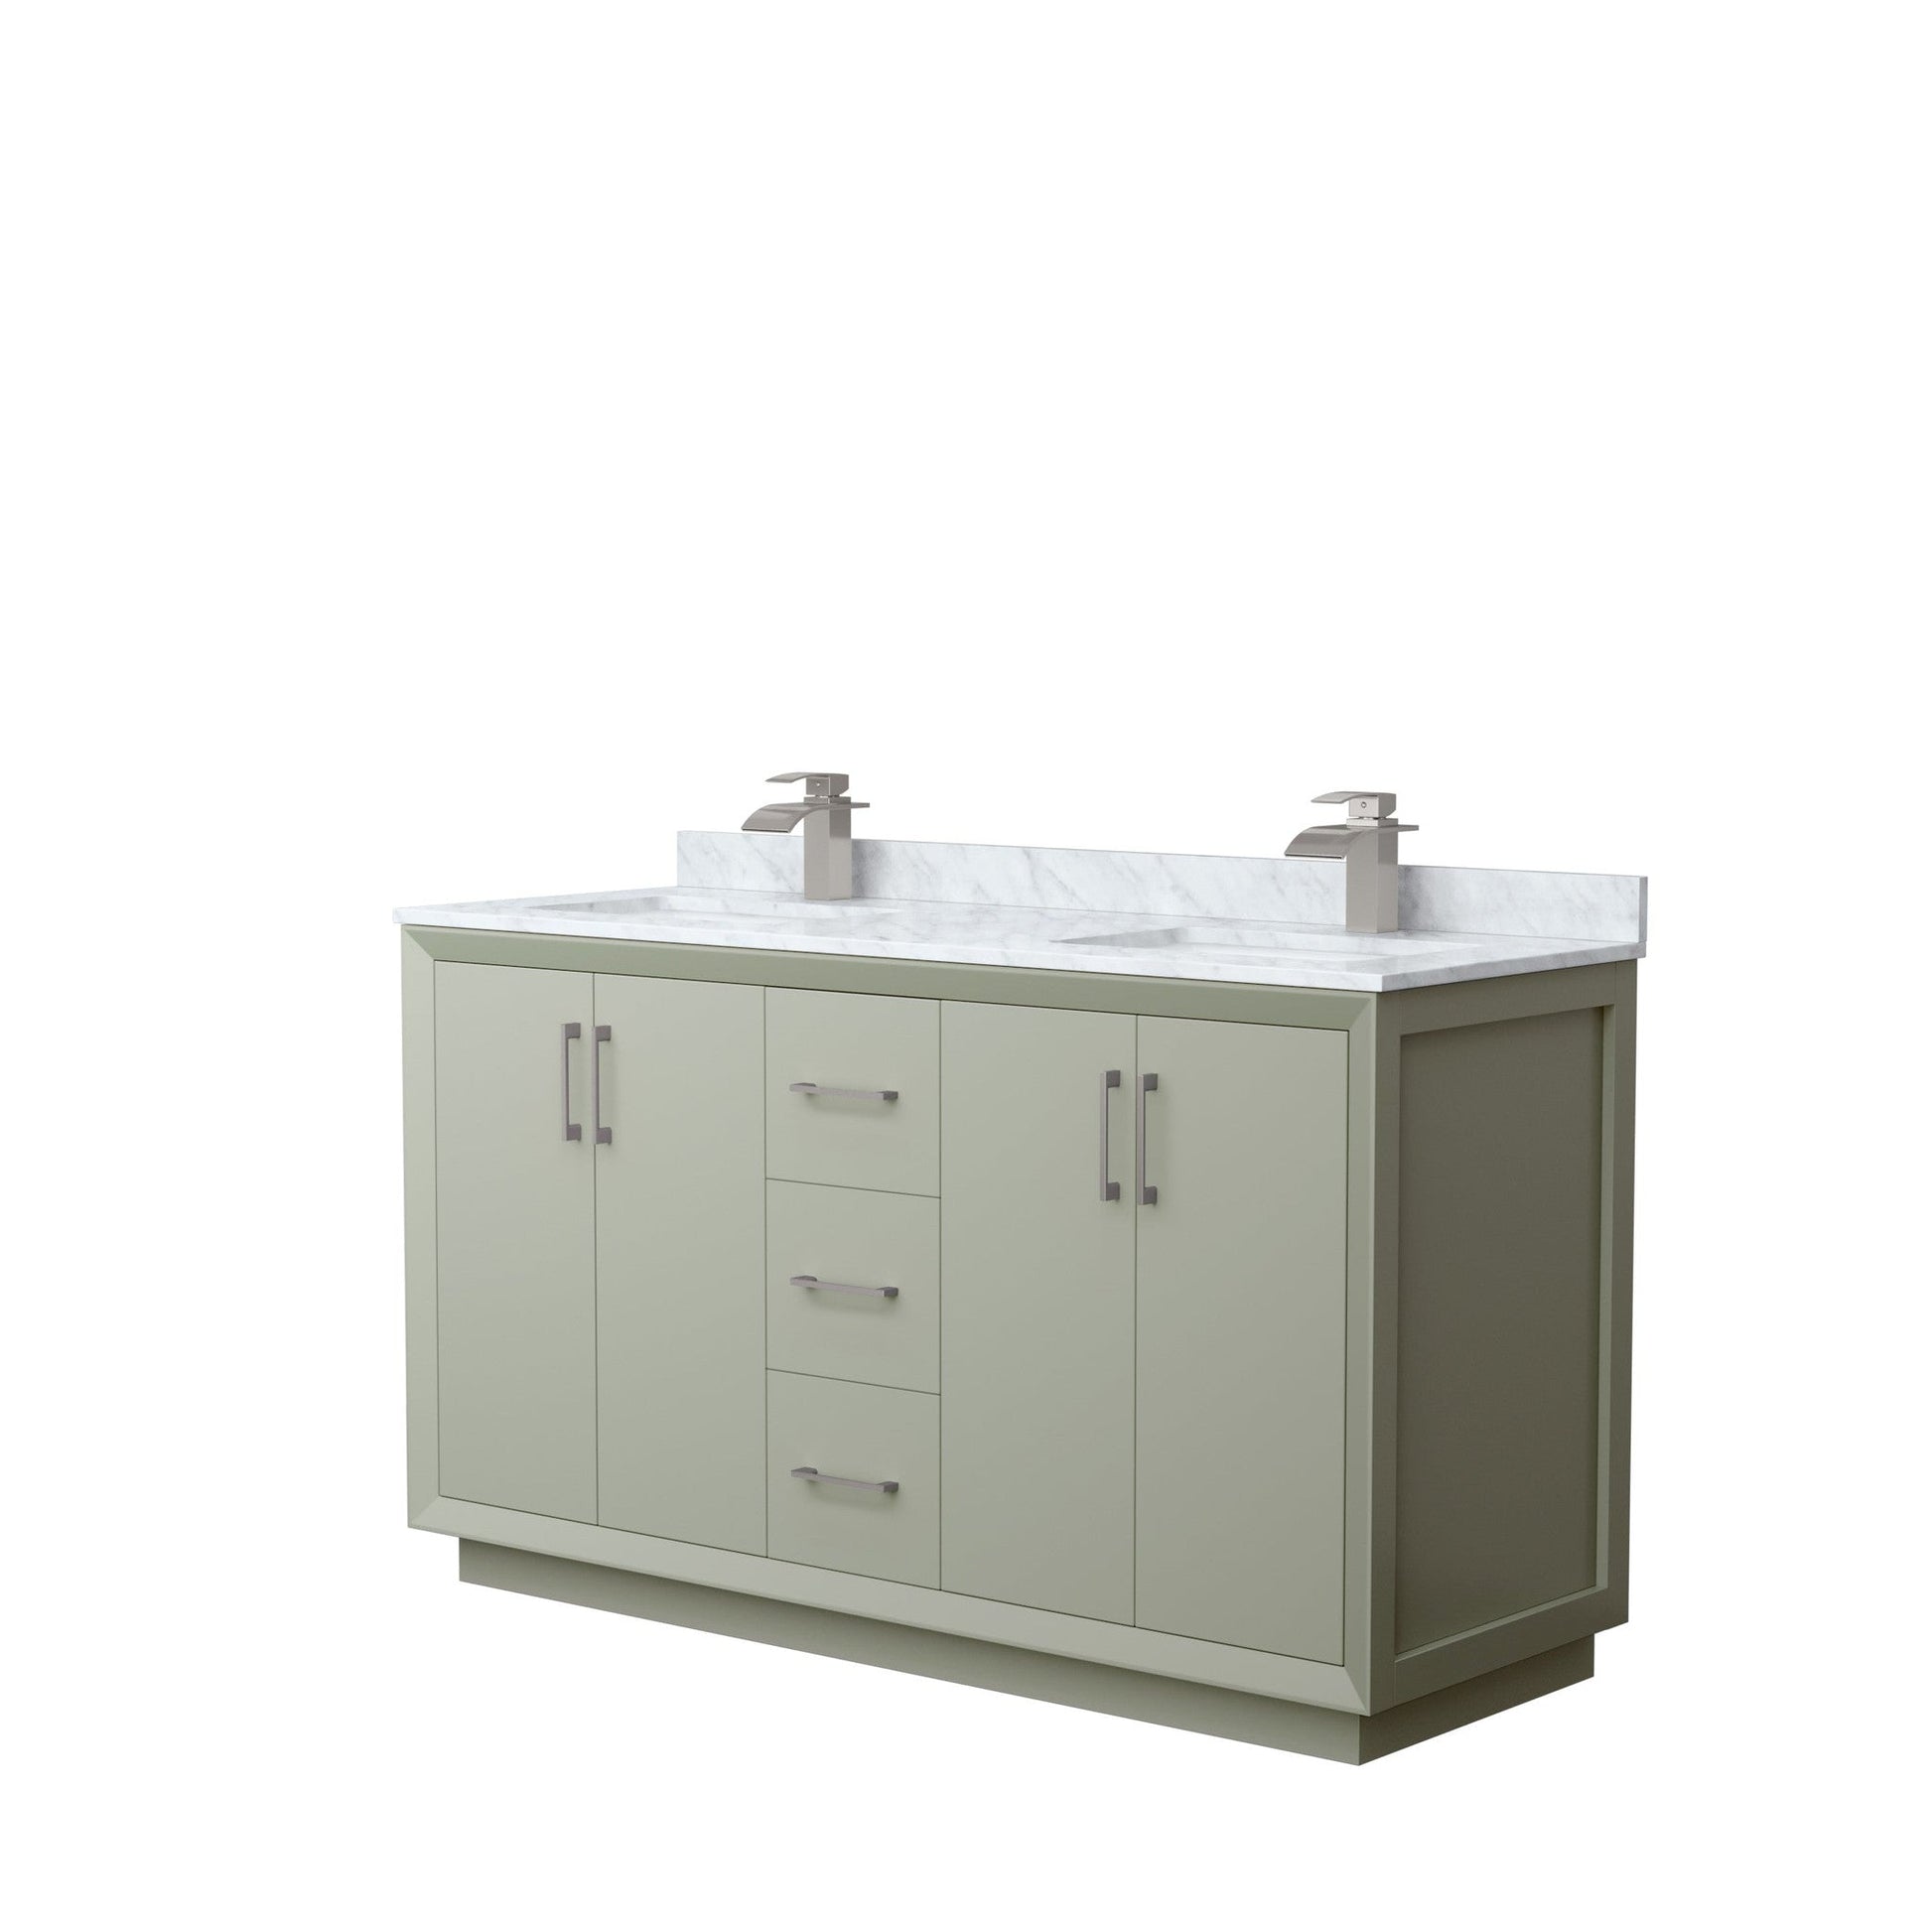 Wyndham Collection Strada 60" Double Bathroom Vanity in Light Green, White Carrara Marble Countertop, Undermount Square Sinks, Brushed Nickel Trim